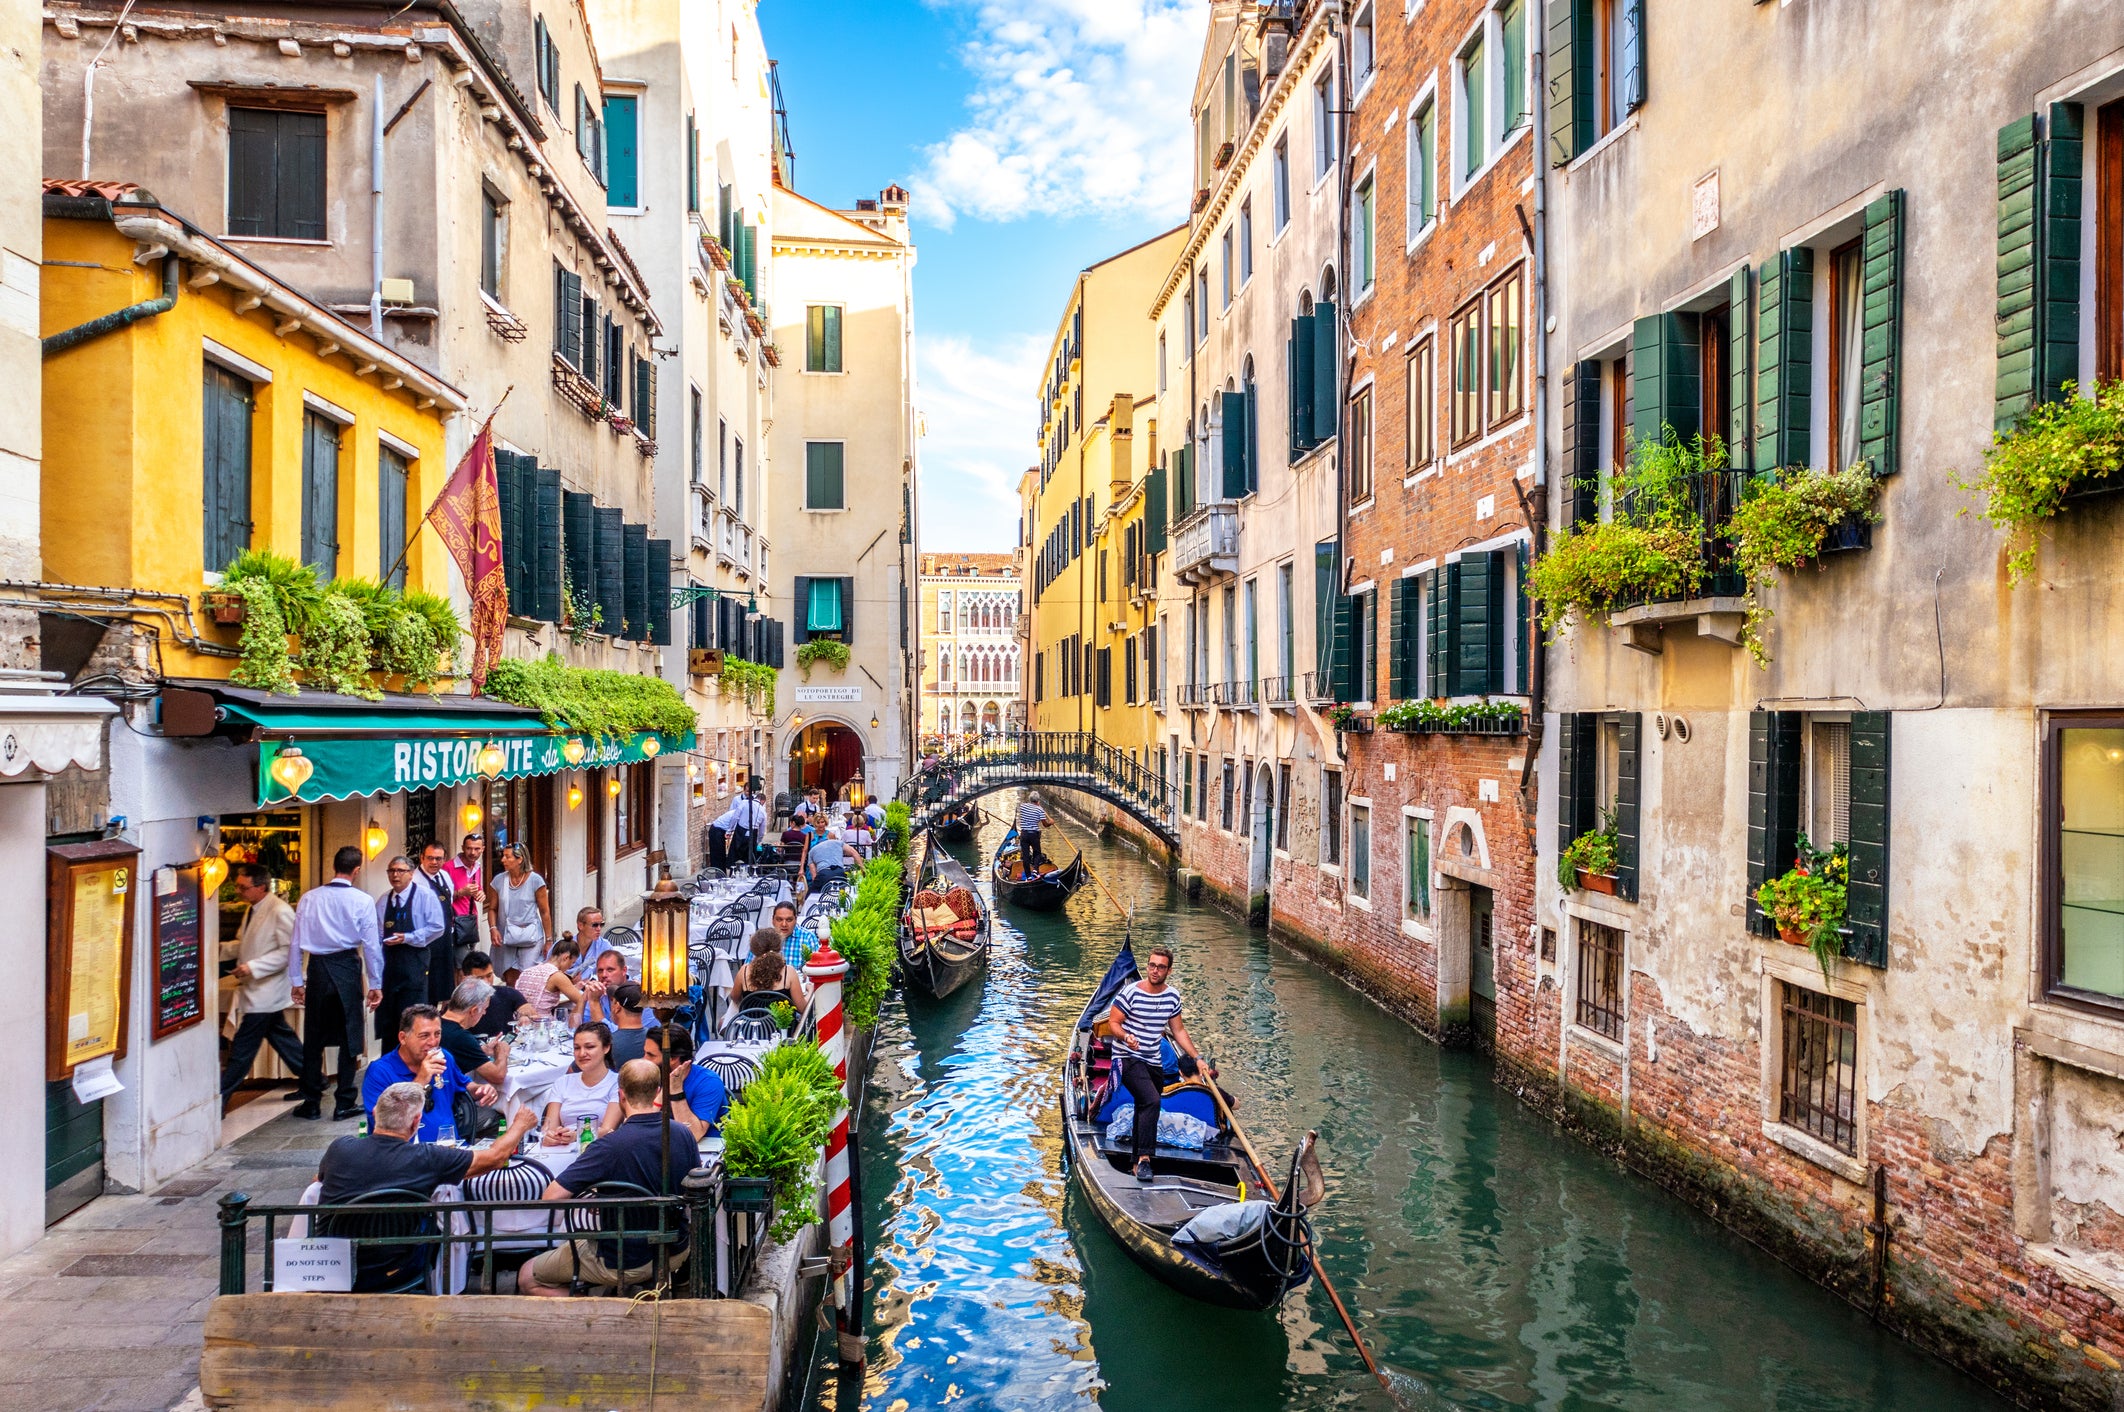 Venice introduced tourist entry fees in April after Unesco warnings